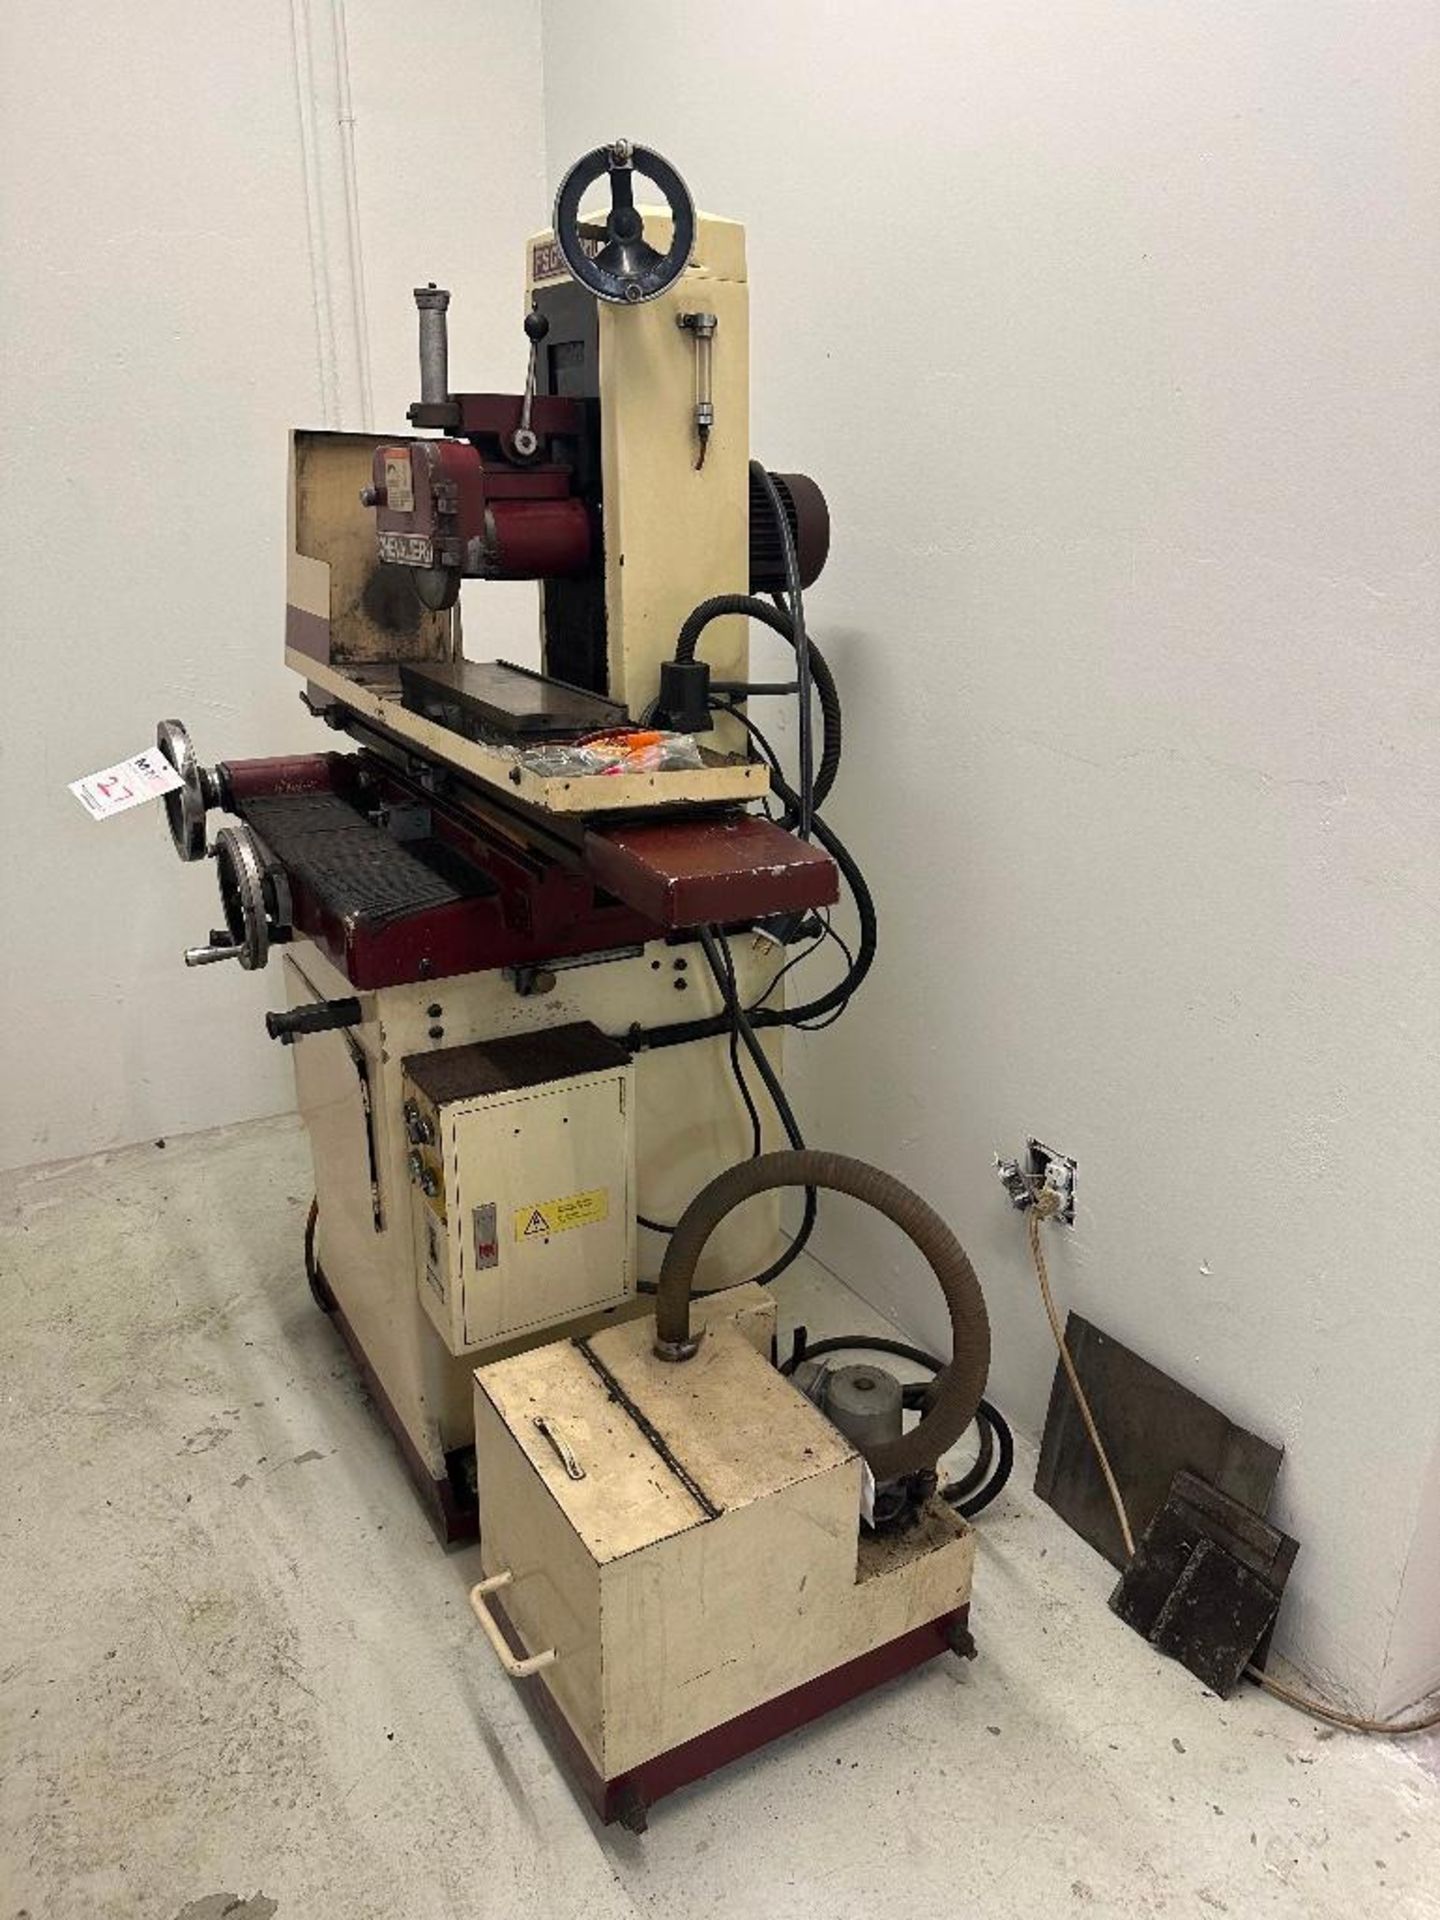 Chevalier FSG-618M Hand Feed Surface Grinder, magnetic chuck, coolant tank, s/n A33L5025 - Image 3 of 5